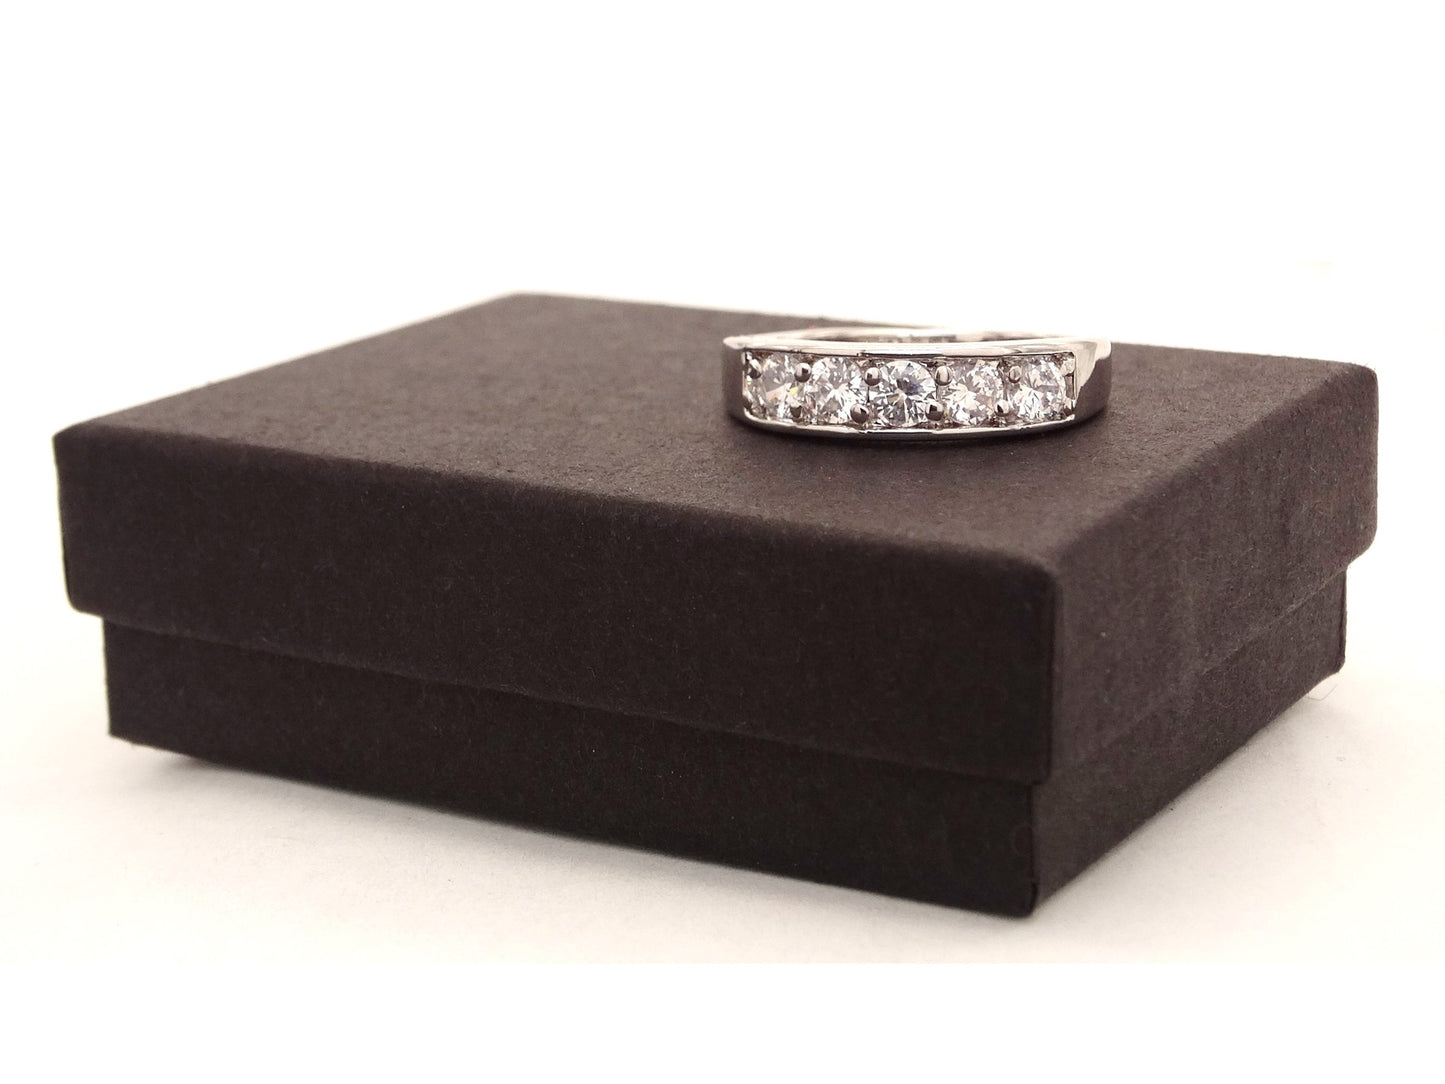 Thick silver gemstone ring GIFT BOX